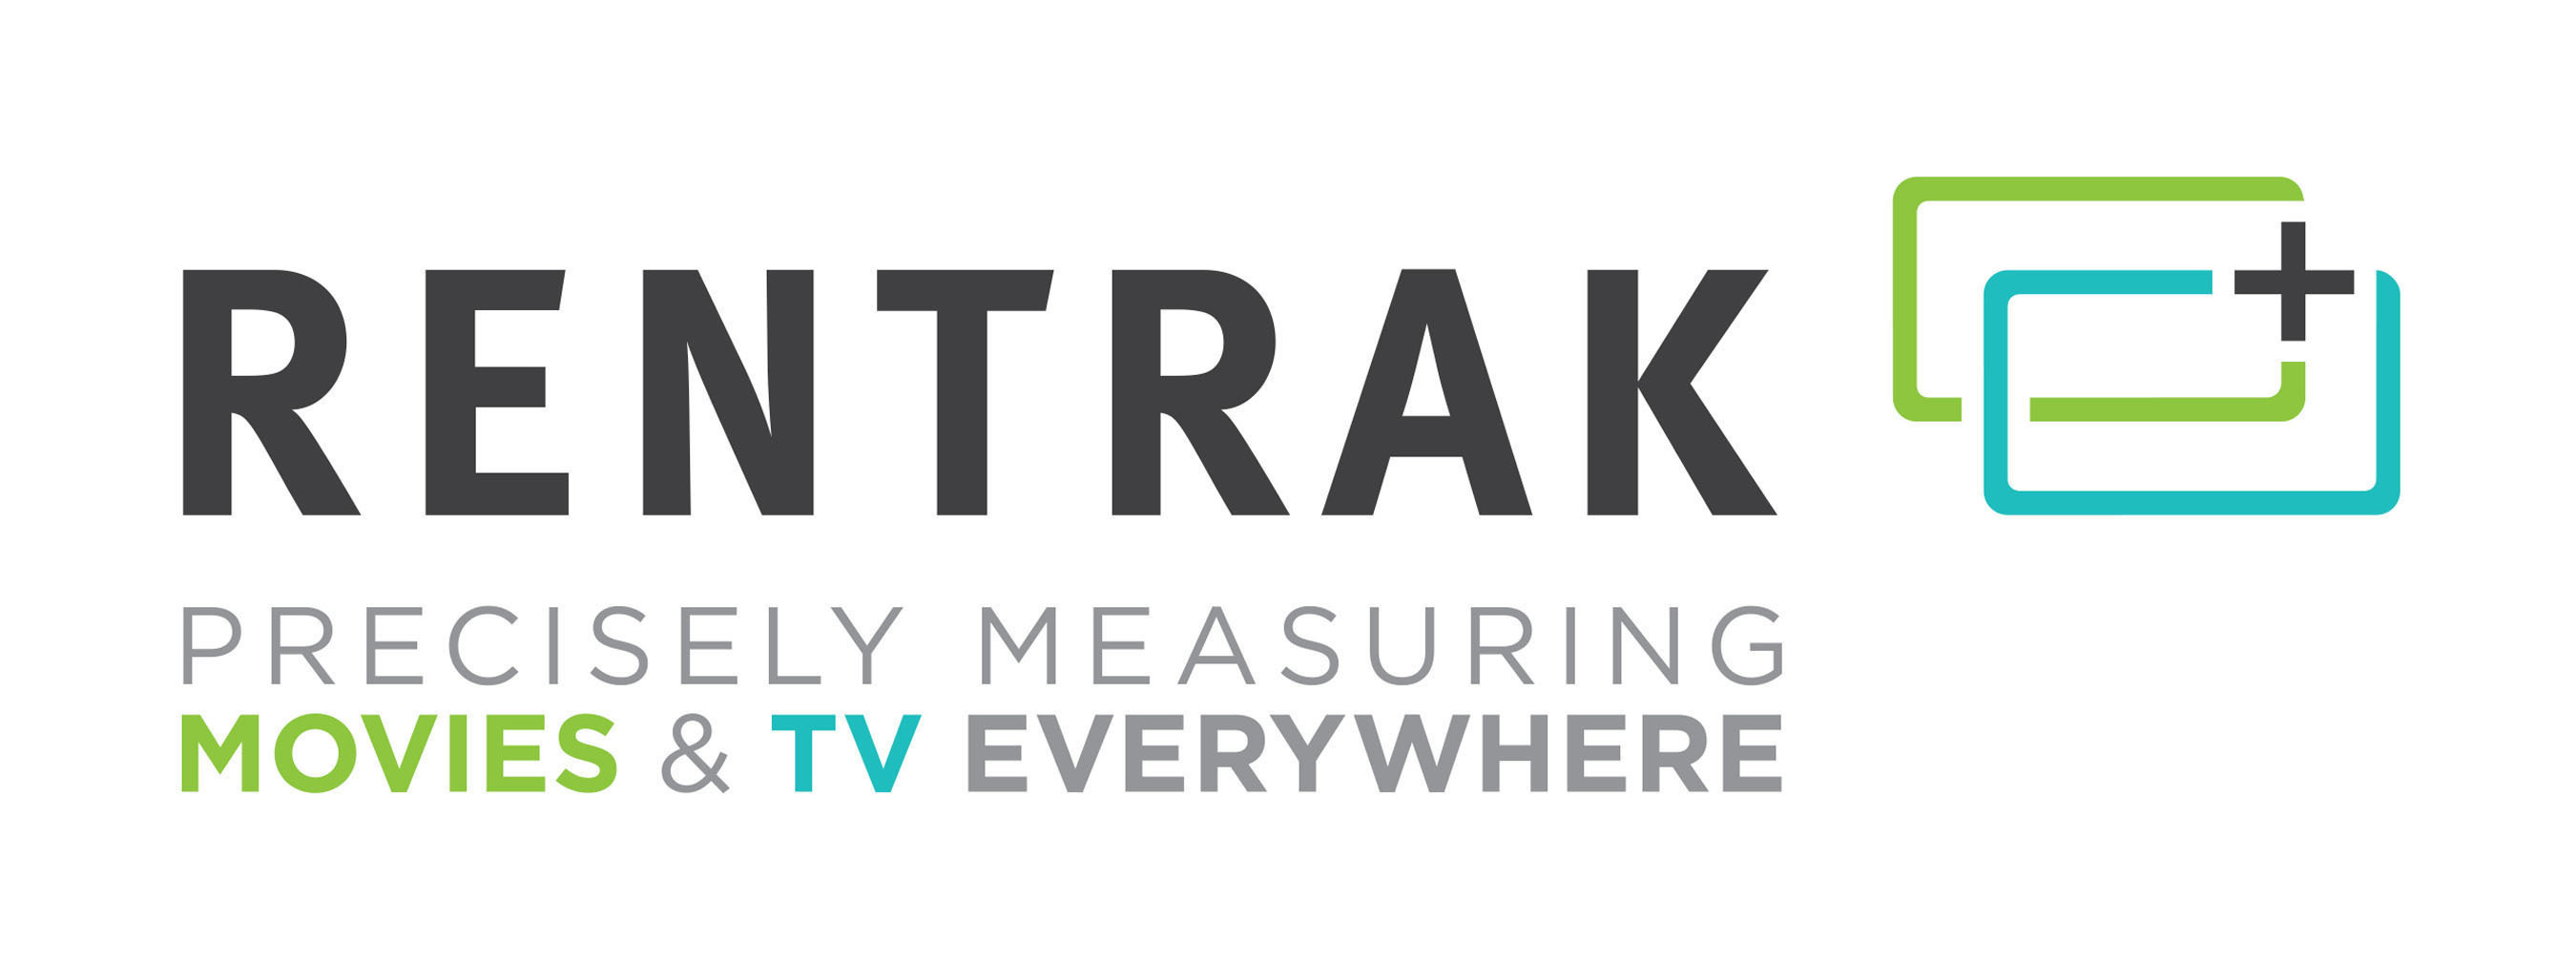 Rentrak is the entertainment industry's premier provider of worldwide consumer viewership information, measuring movie and television content everywhere the consumer is watching including box office, multiscreen television and home video. (PRNewsFoto/Rentrak Corporation) (PRNewsFoto/Rentrak Corporation)